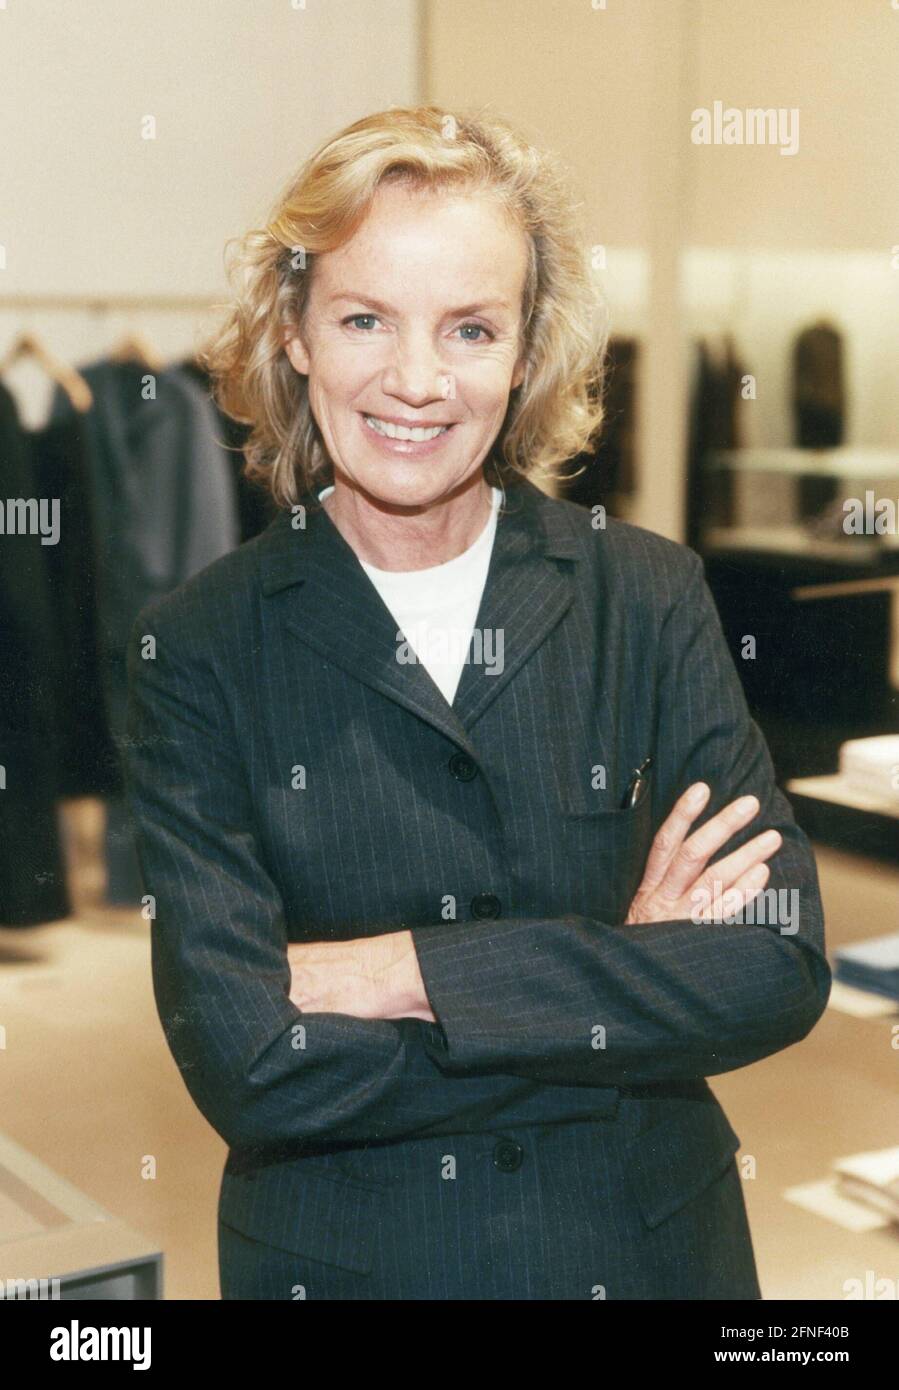 Jil sander 1997 hi-res stock photography and images - Alamy